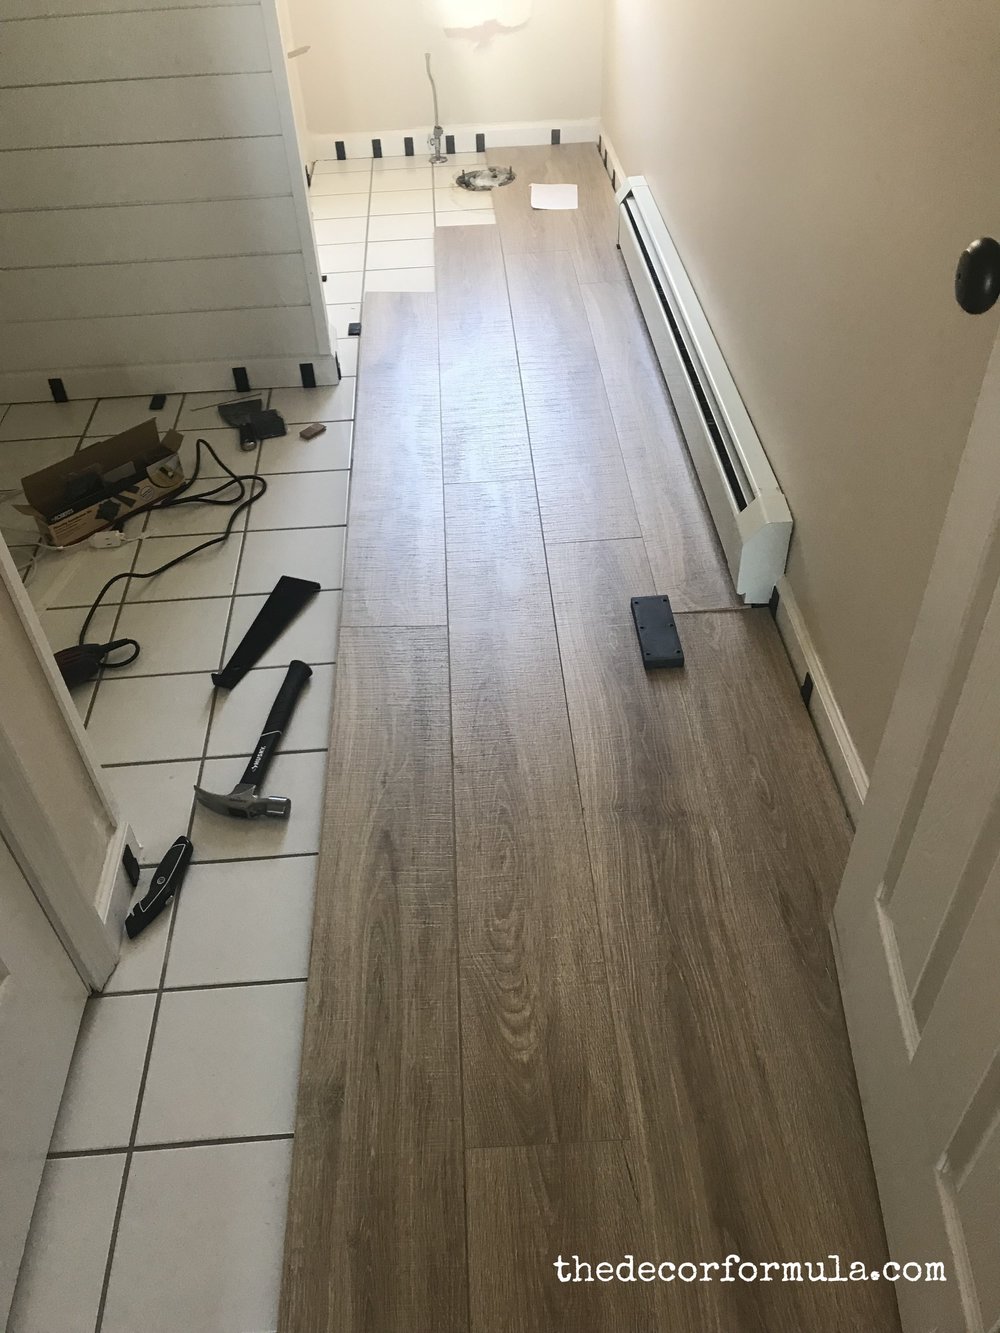 Ideas For Covering Up Tile Floors, What Kind Of Flooring Can I Put Over Ceramic Tile